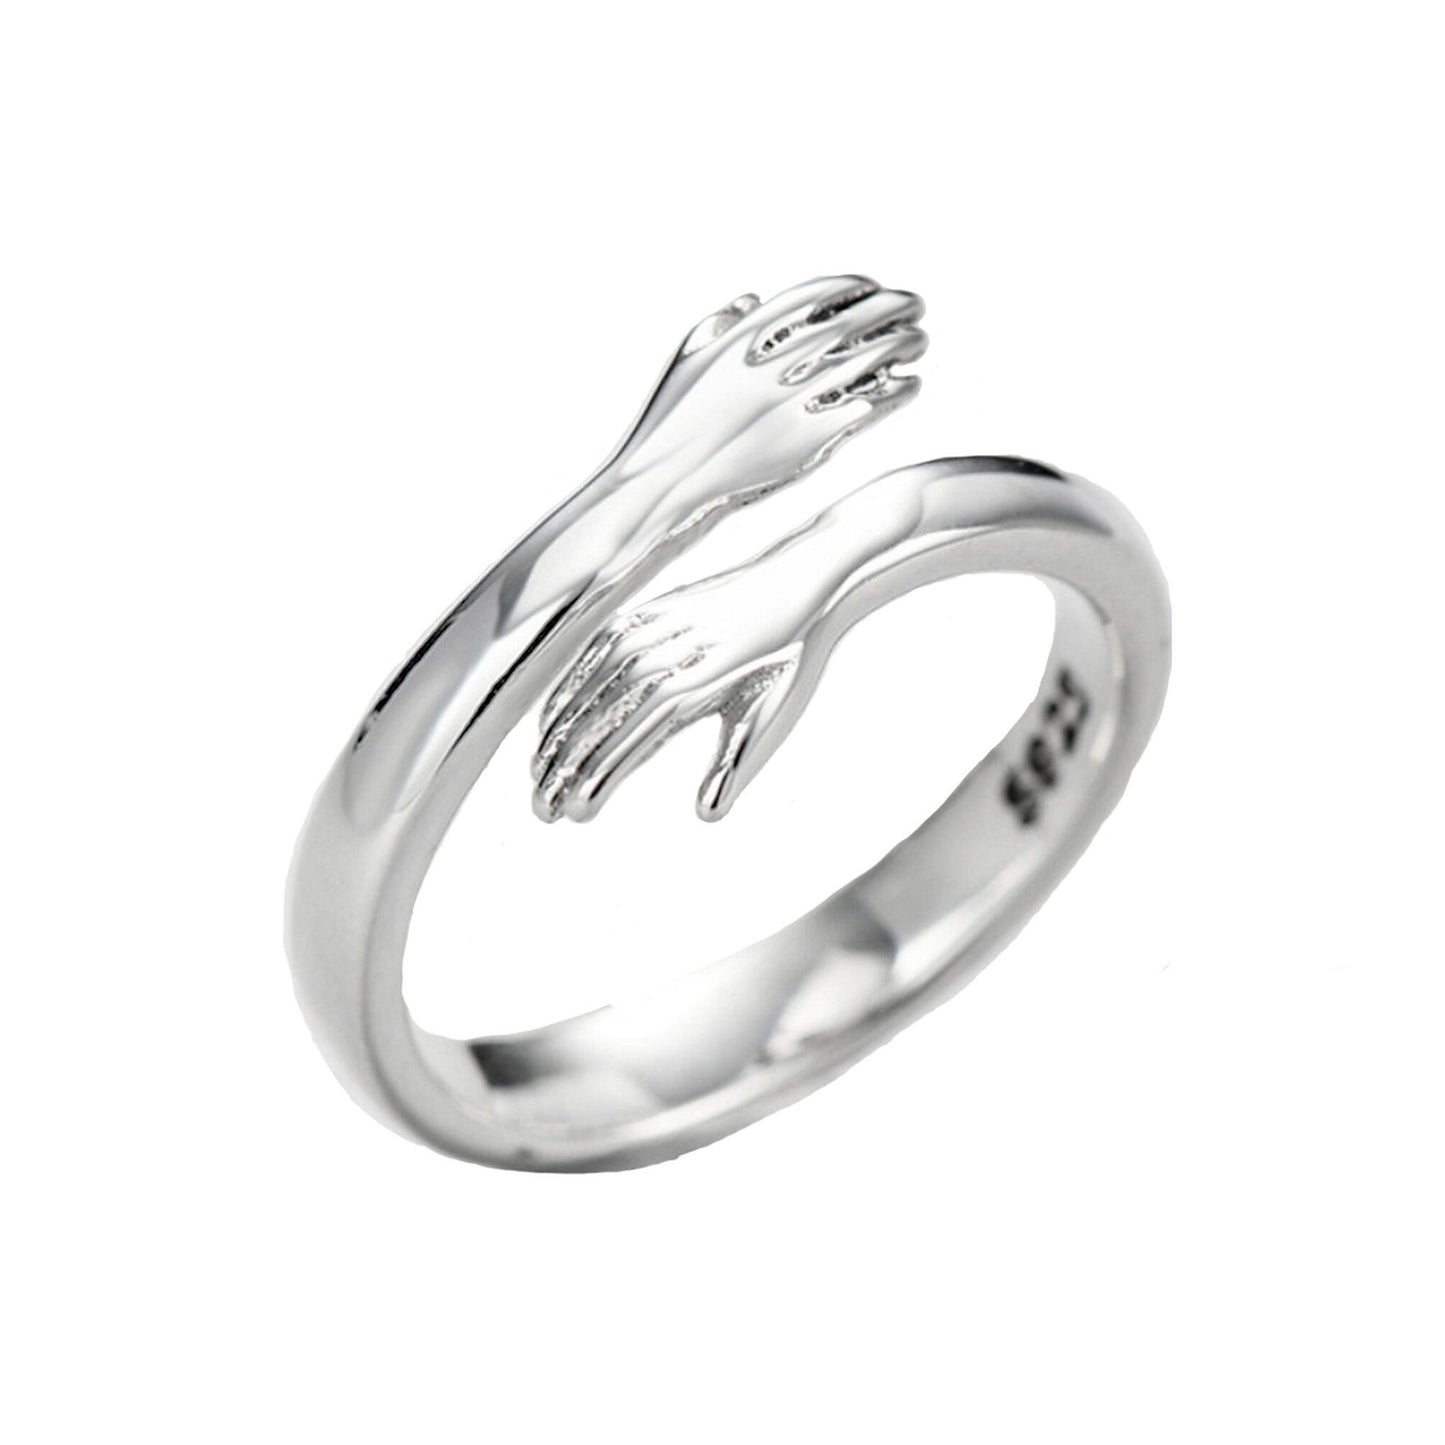 Sterling Silver Hugging Hands hold me tight Adjustable Ring love support Comforting Christmas gift hug ring